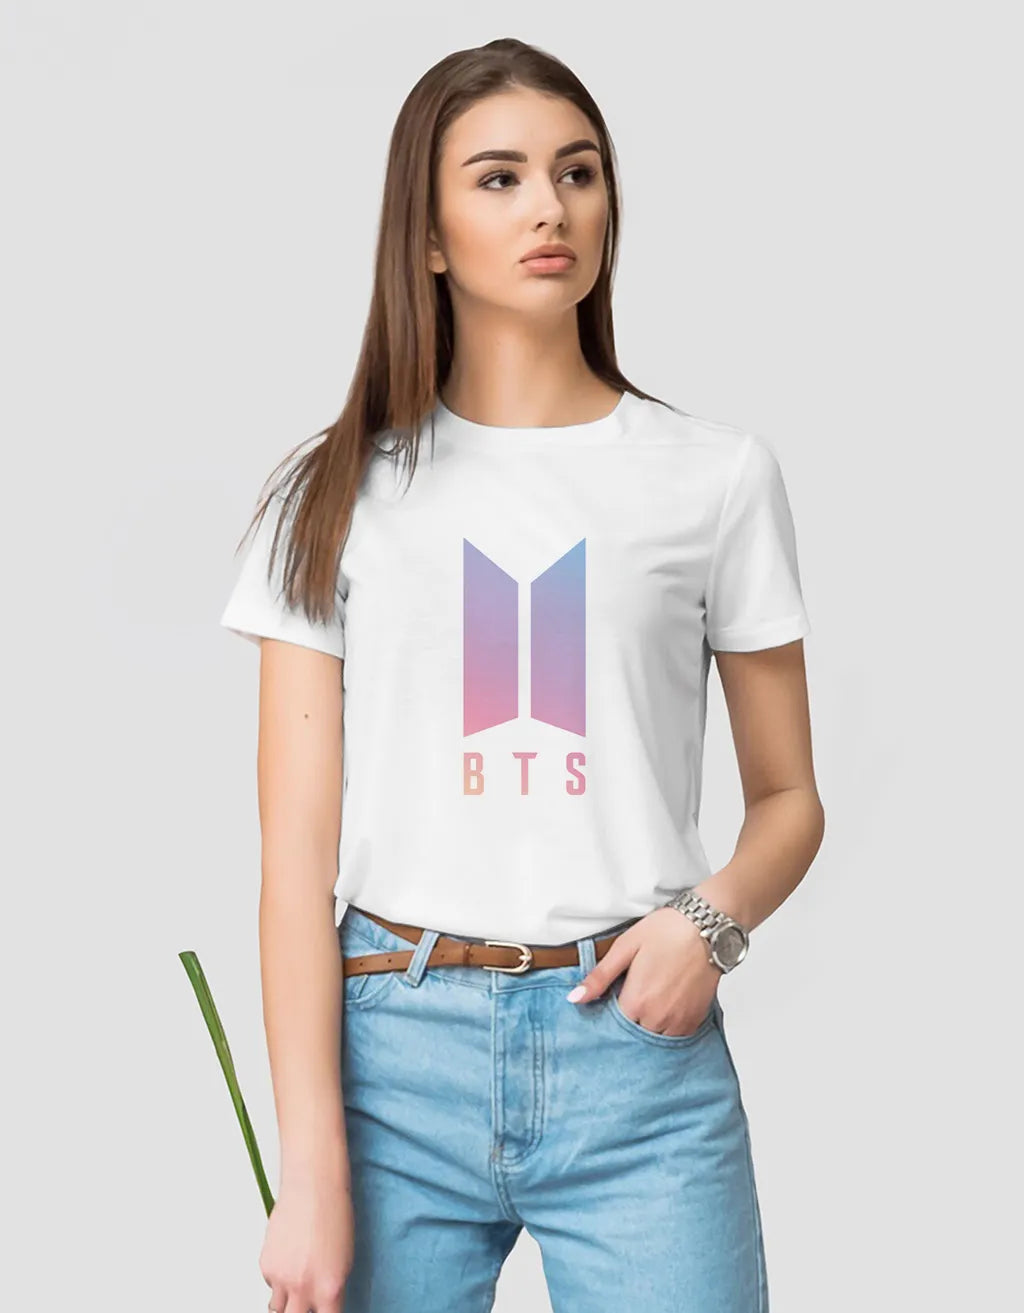 Printed BTS T shirt for Bts